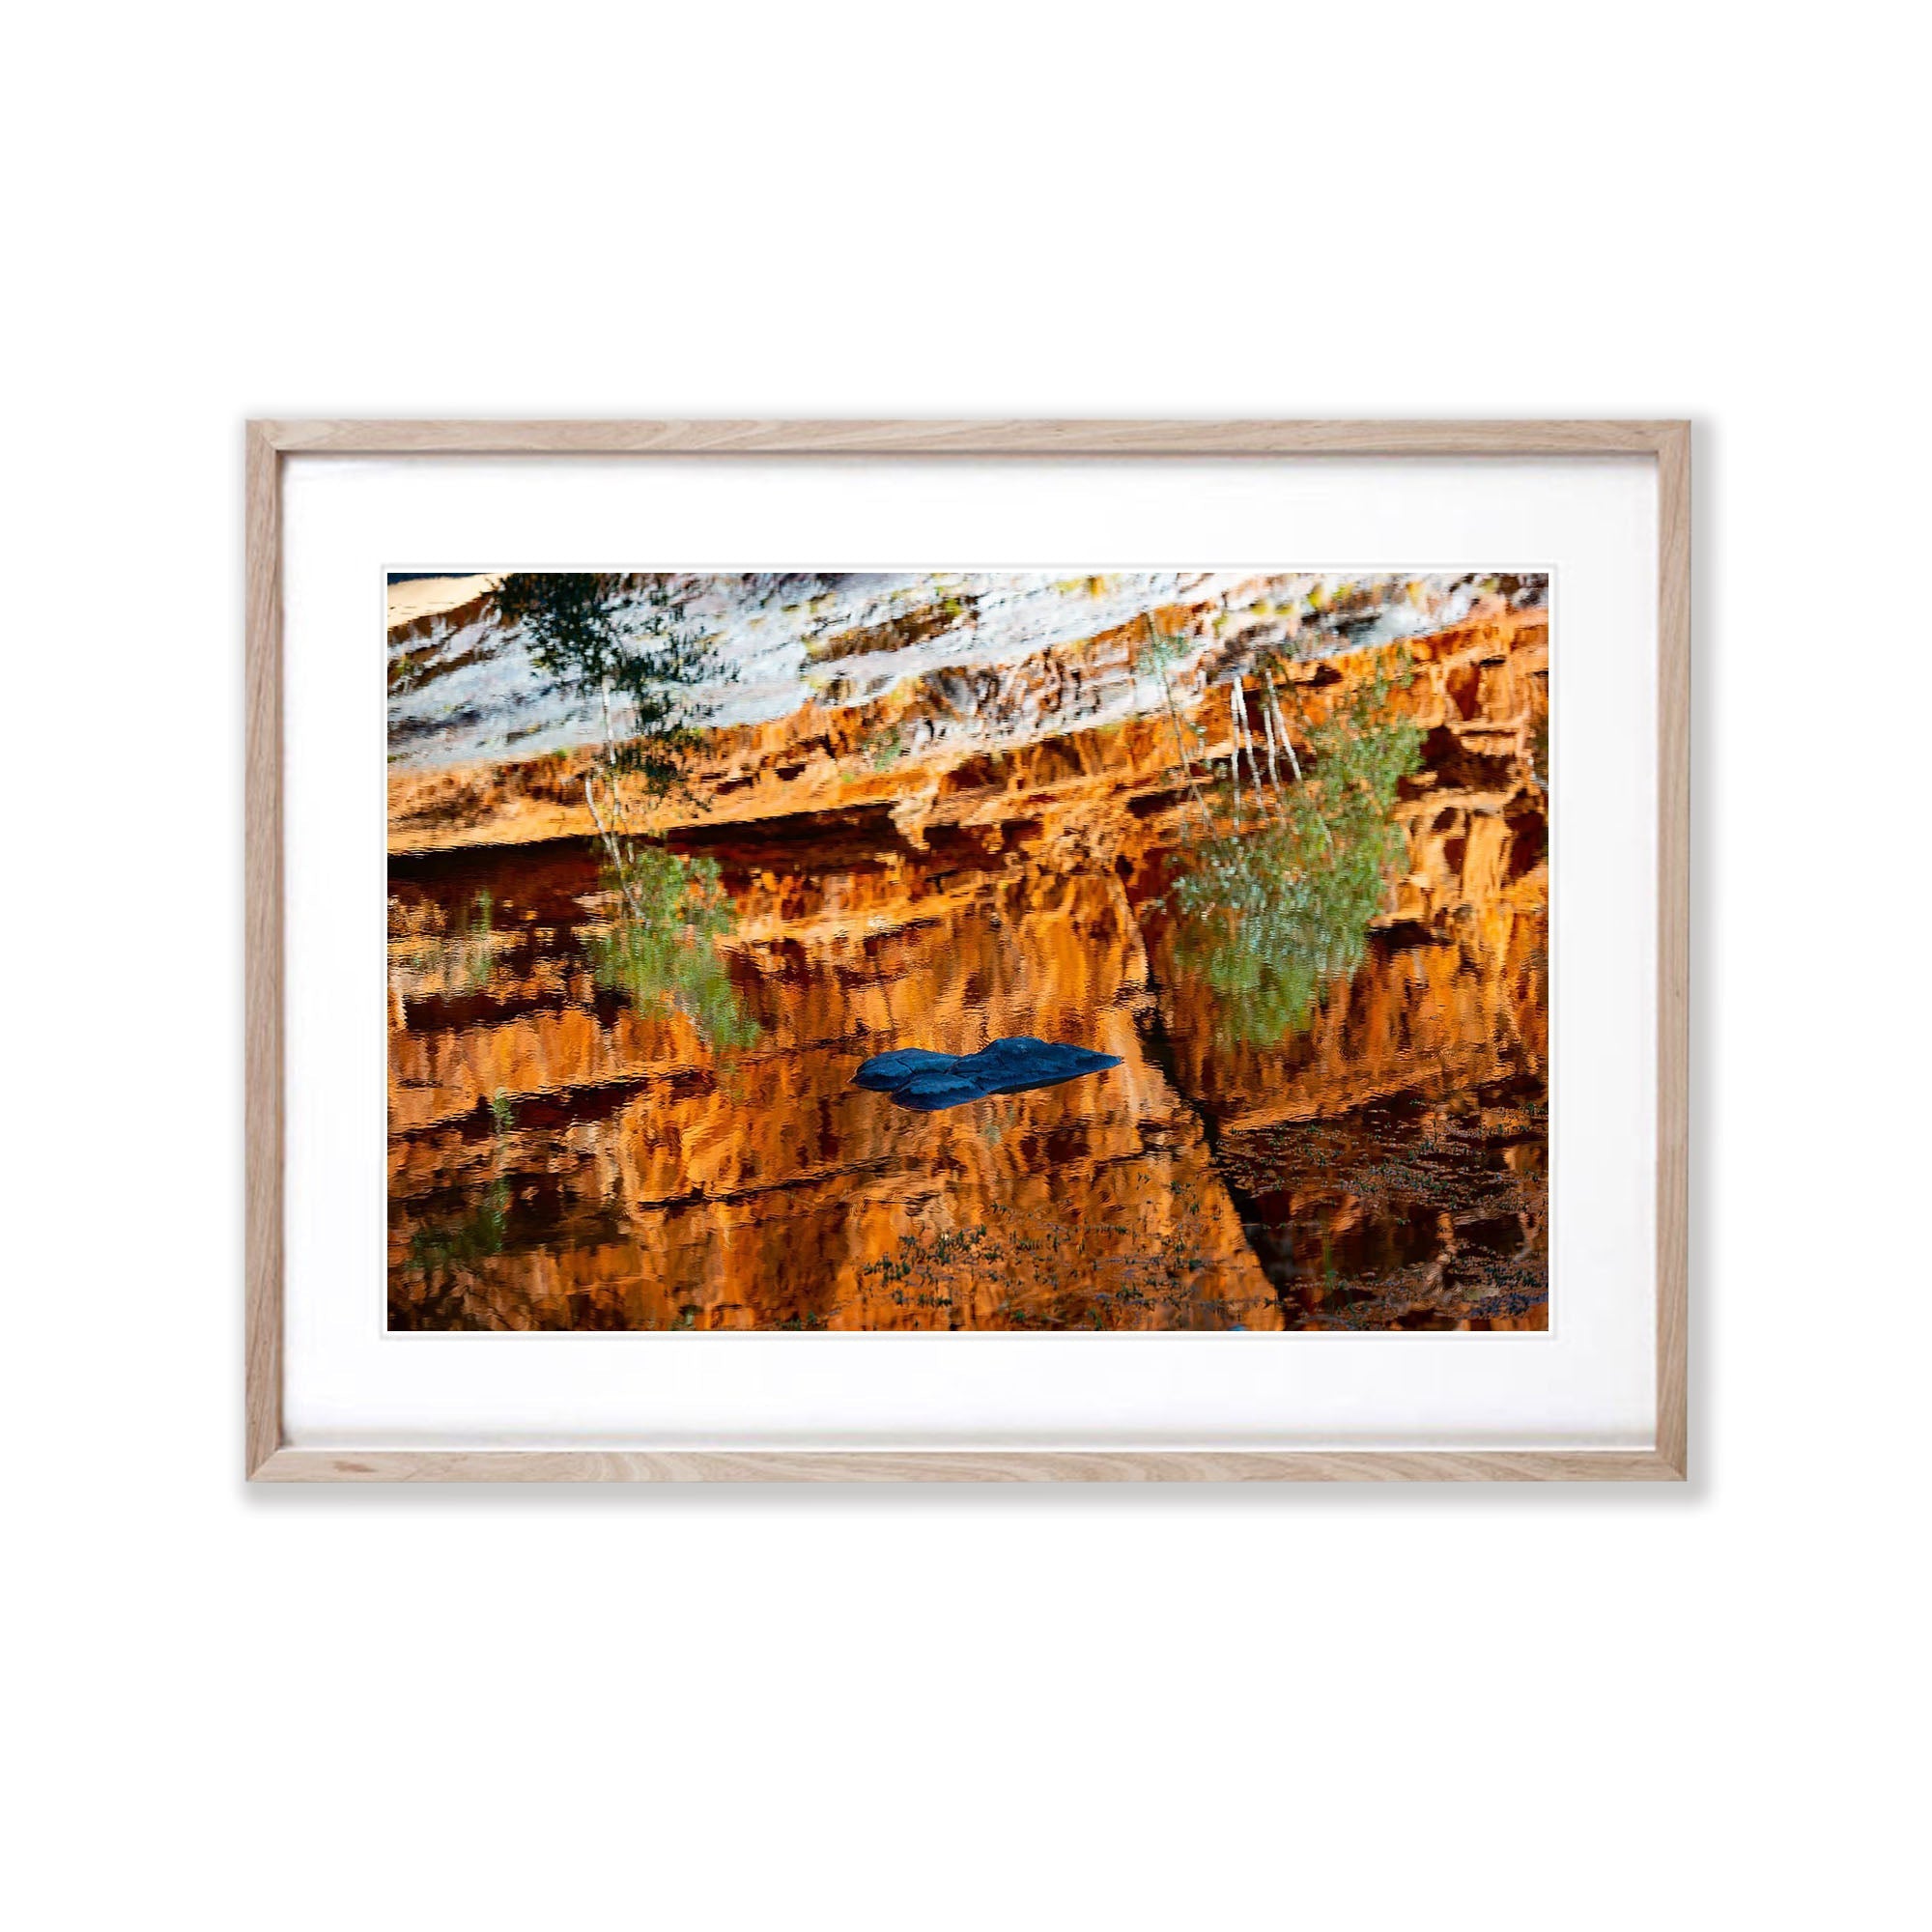 Ormiston Gorge Reflections, West MacDonnell Ranges - Northern Territory